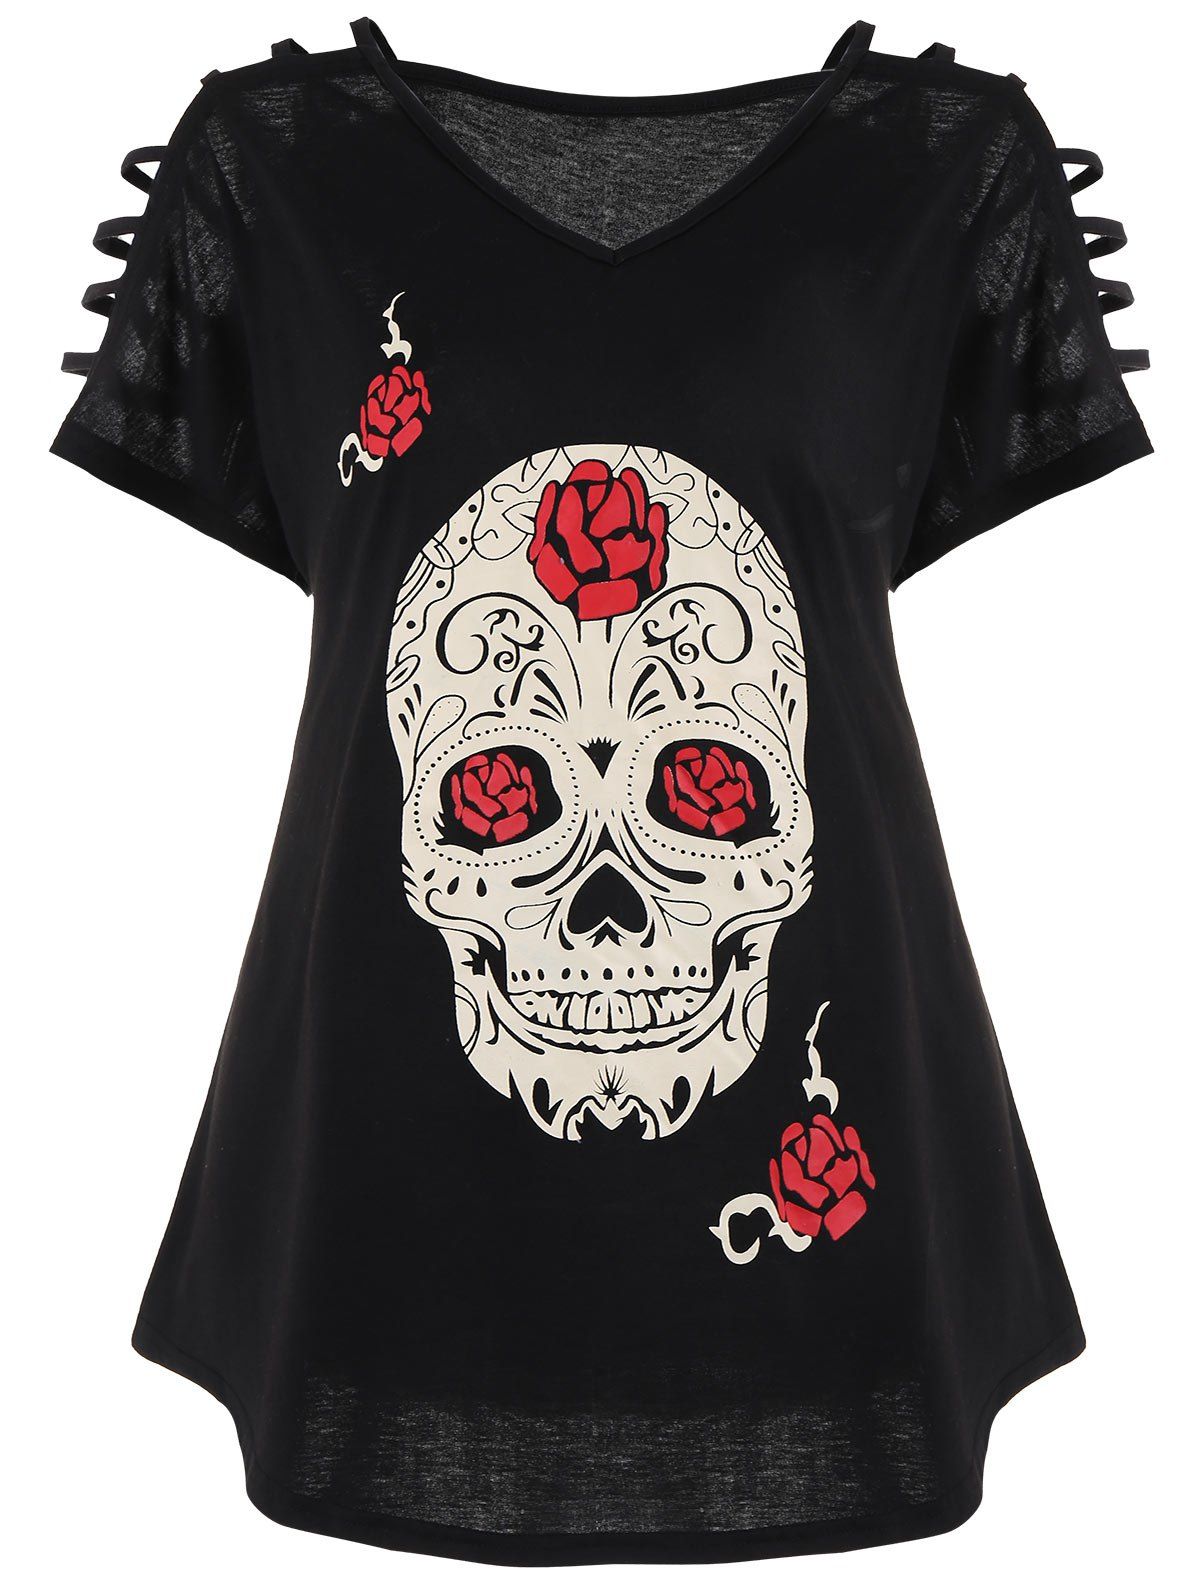 [41% OFF] 2021 Cut Out Skull Print Plus Size Tee In BLACK | DressLily